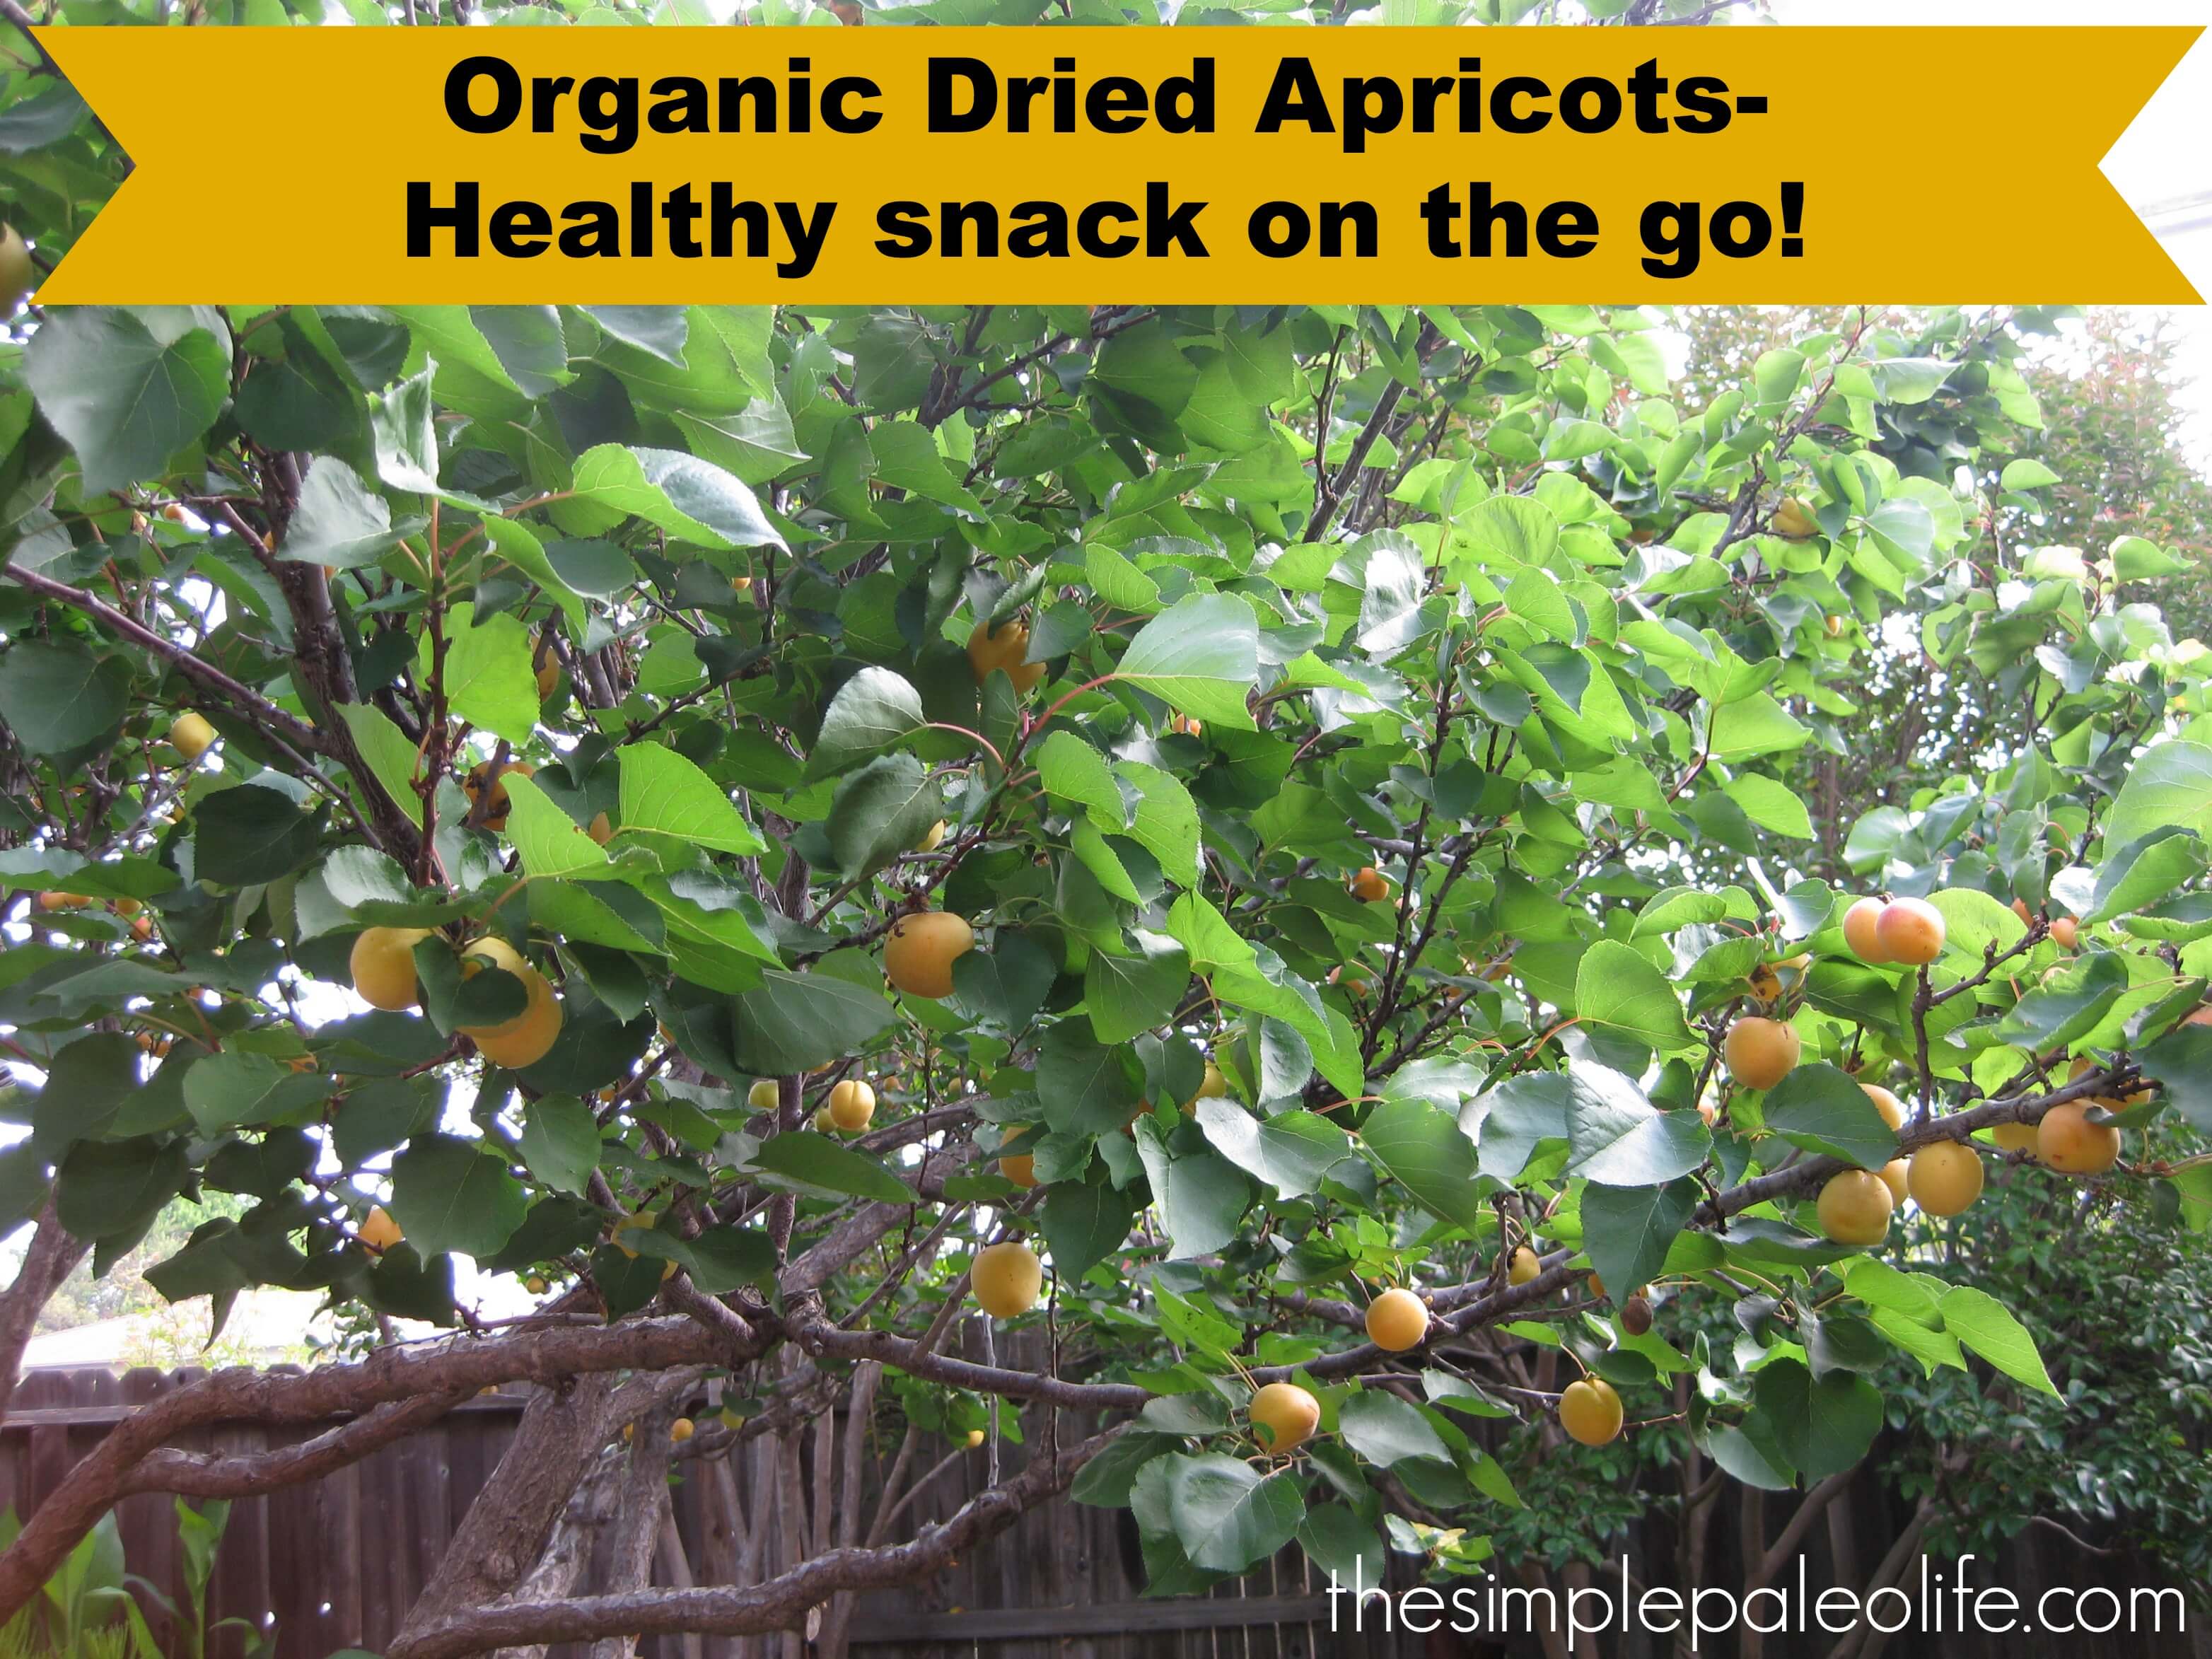 Organic Dried Apricots-Healthy Snack on the go!